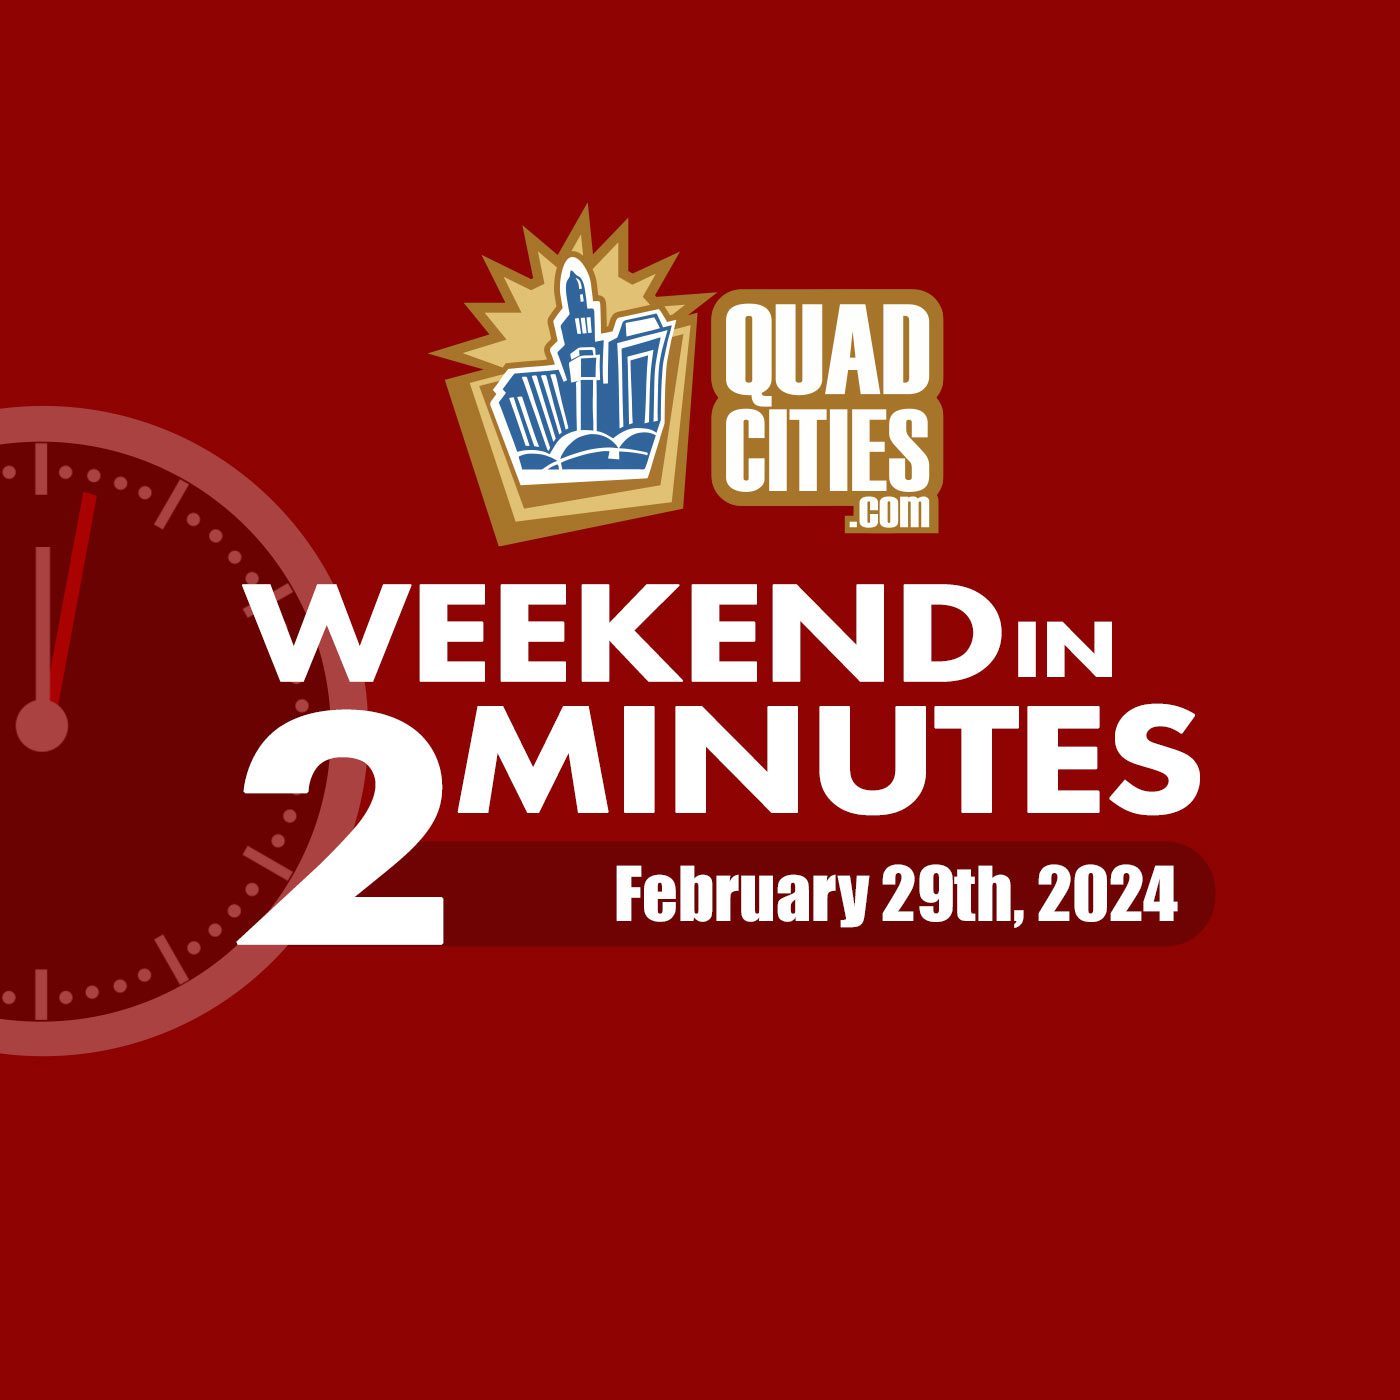 Quad Cities Weekend In 2 Minutes February 29th, 2024 Quad Cities